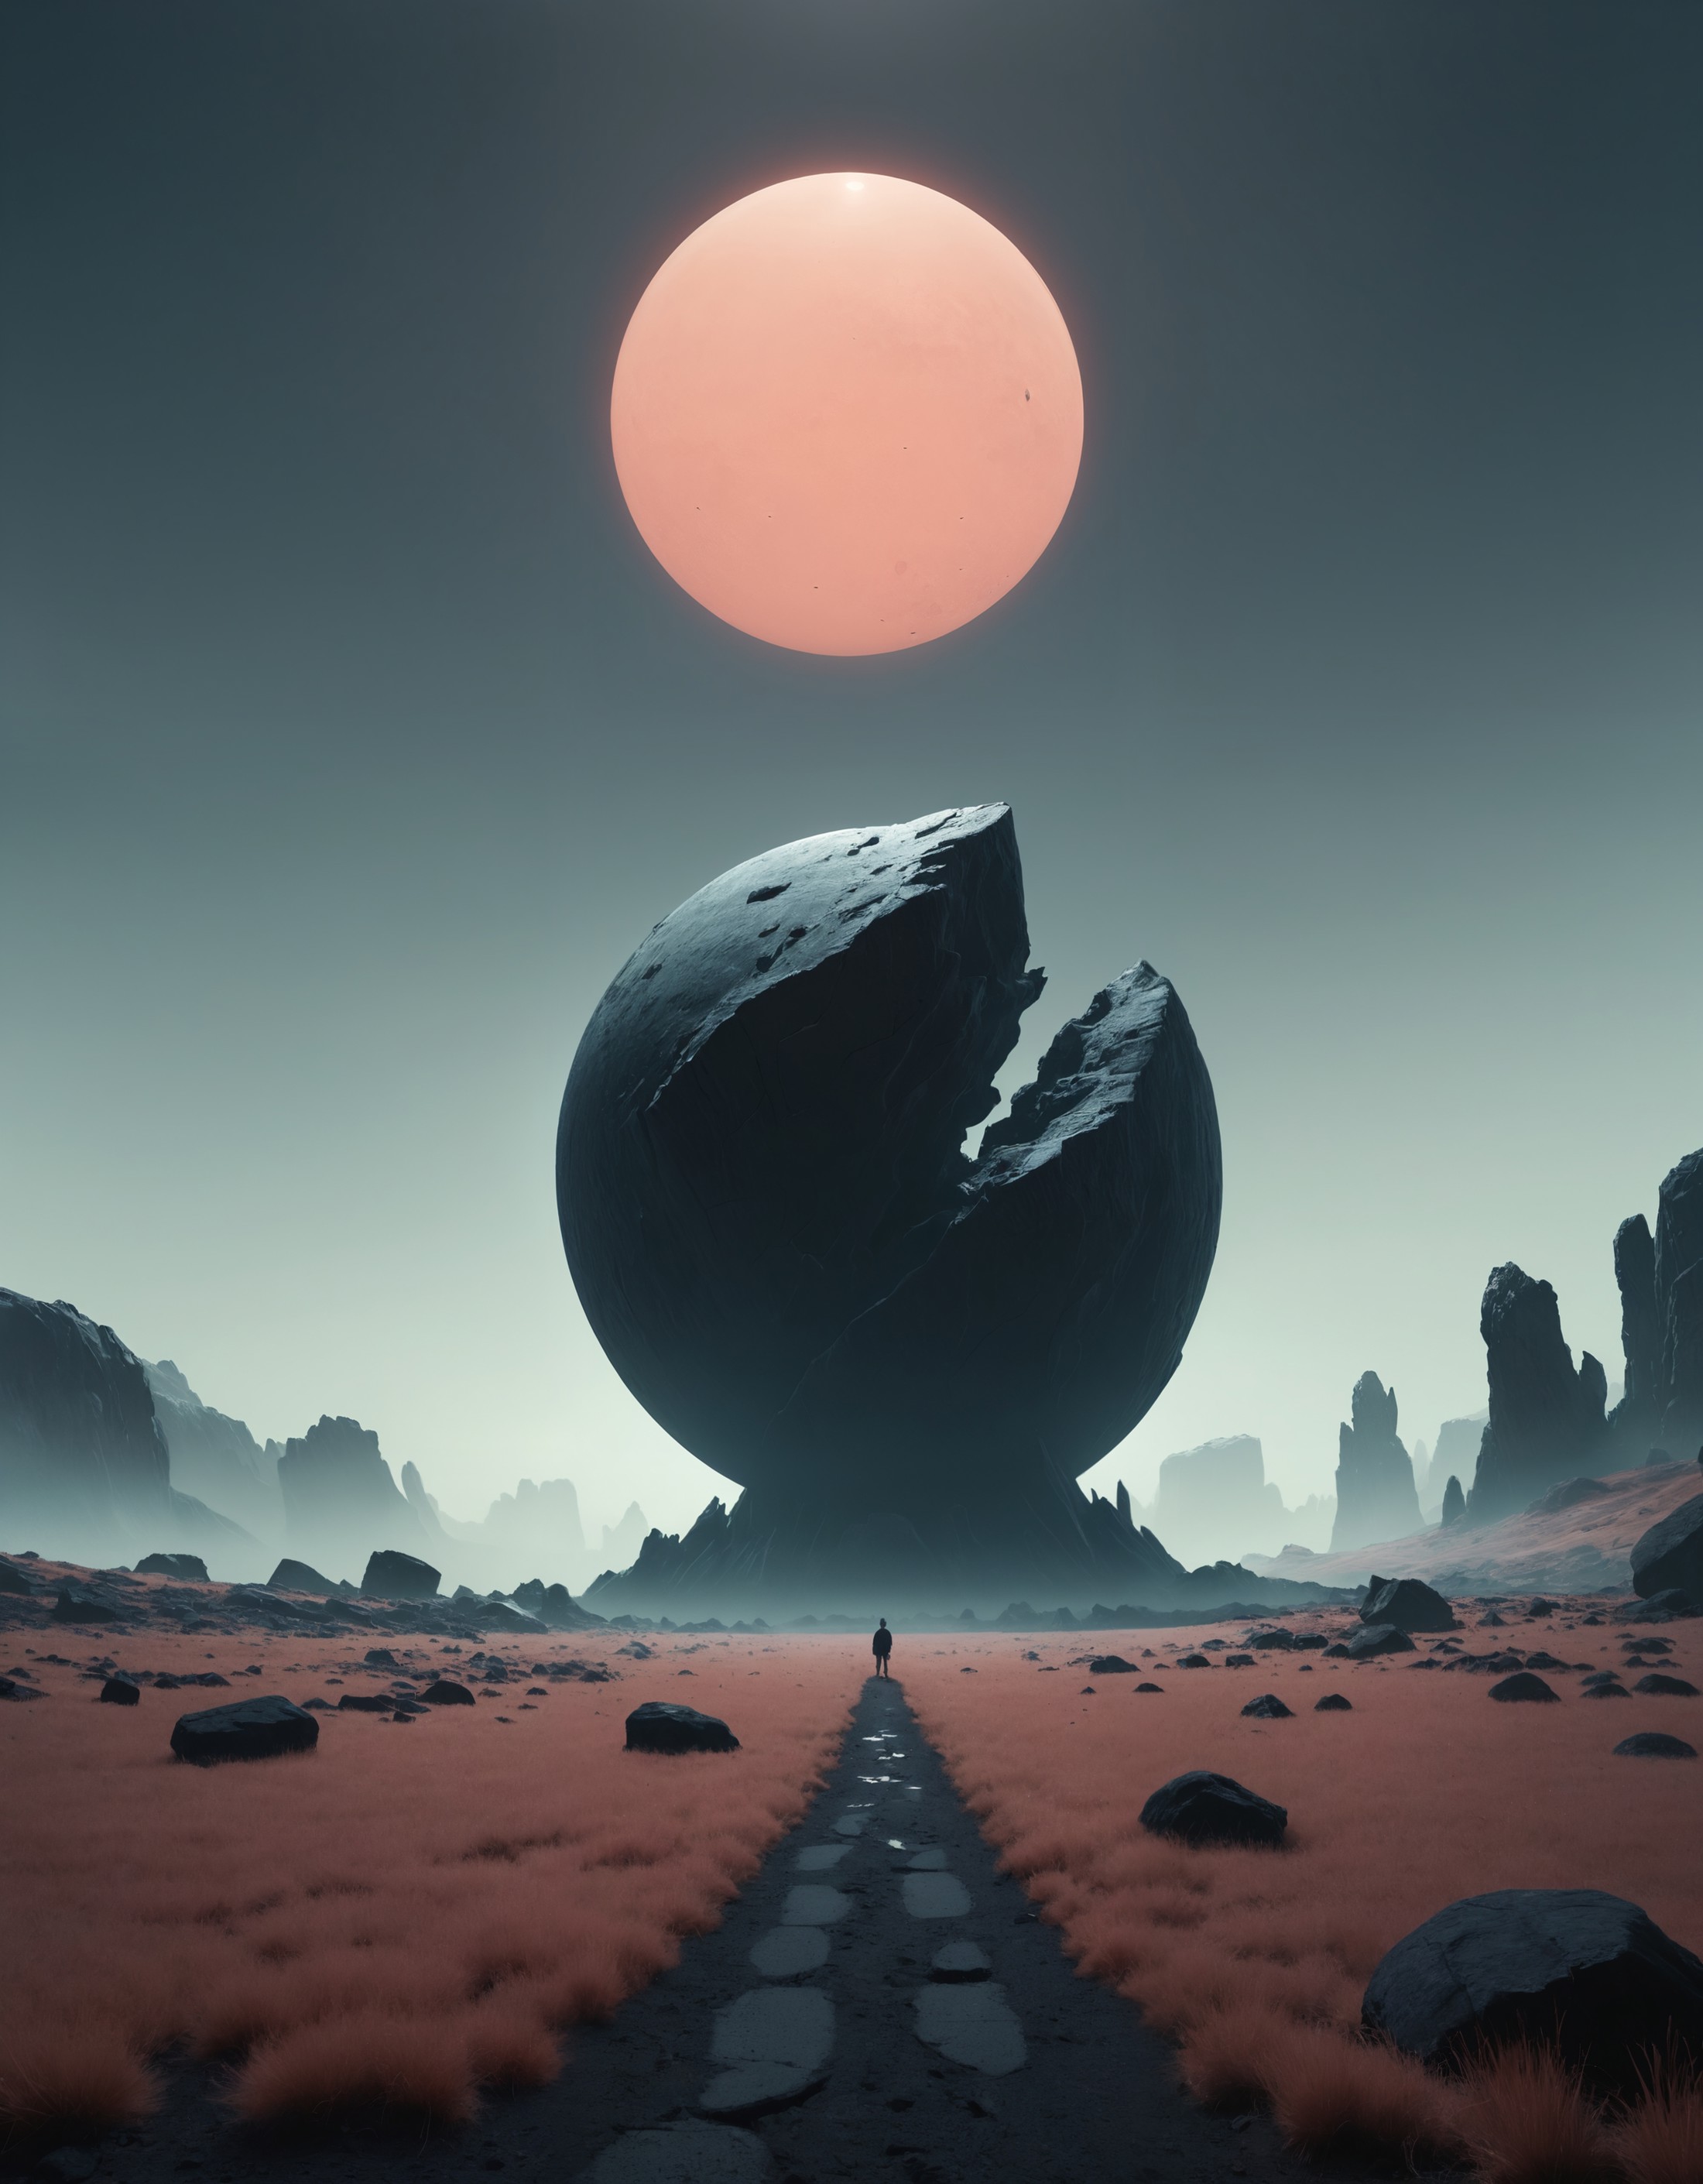 minimalist, carbonite planet, infrared picture, soft colors, outdoors, field, giant sharp dark rocks, scenery, pale sun, f...